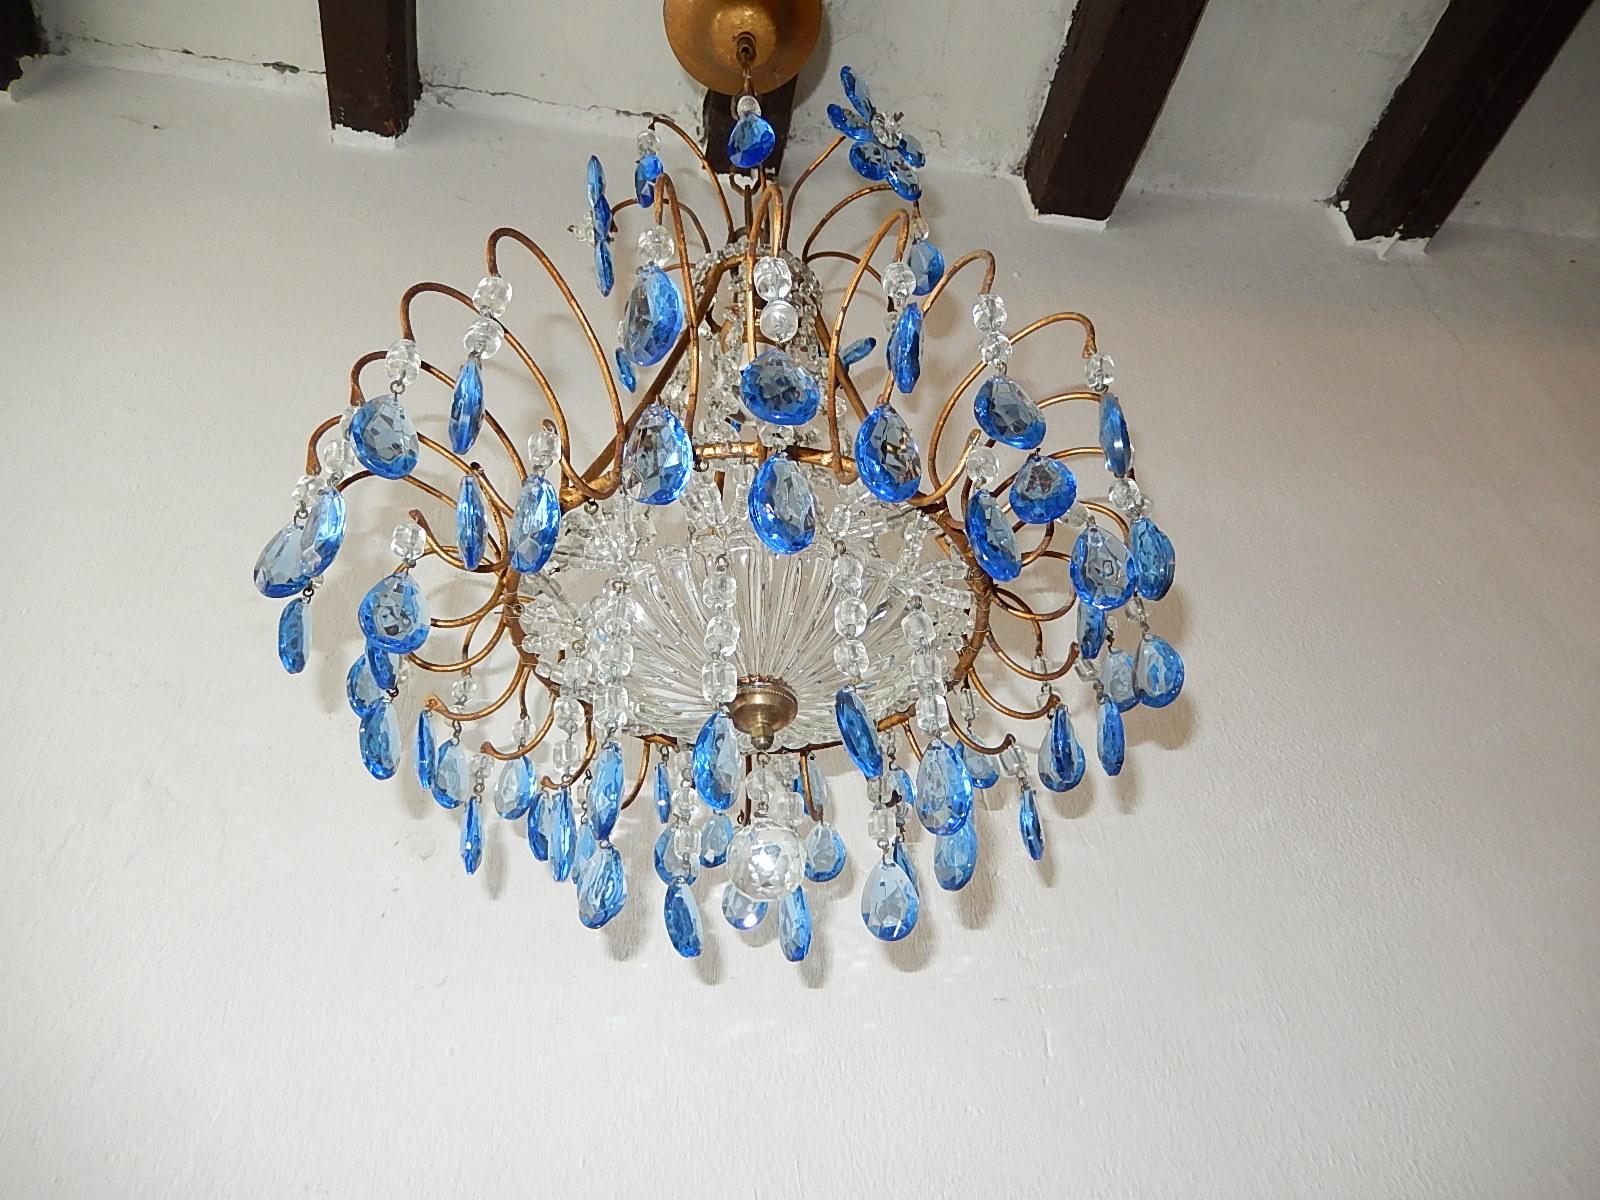 Murano Glass Italian Blue Crystal Prisms with Flowers Chandelier, circa 1920